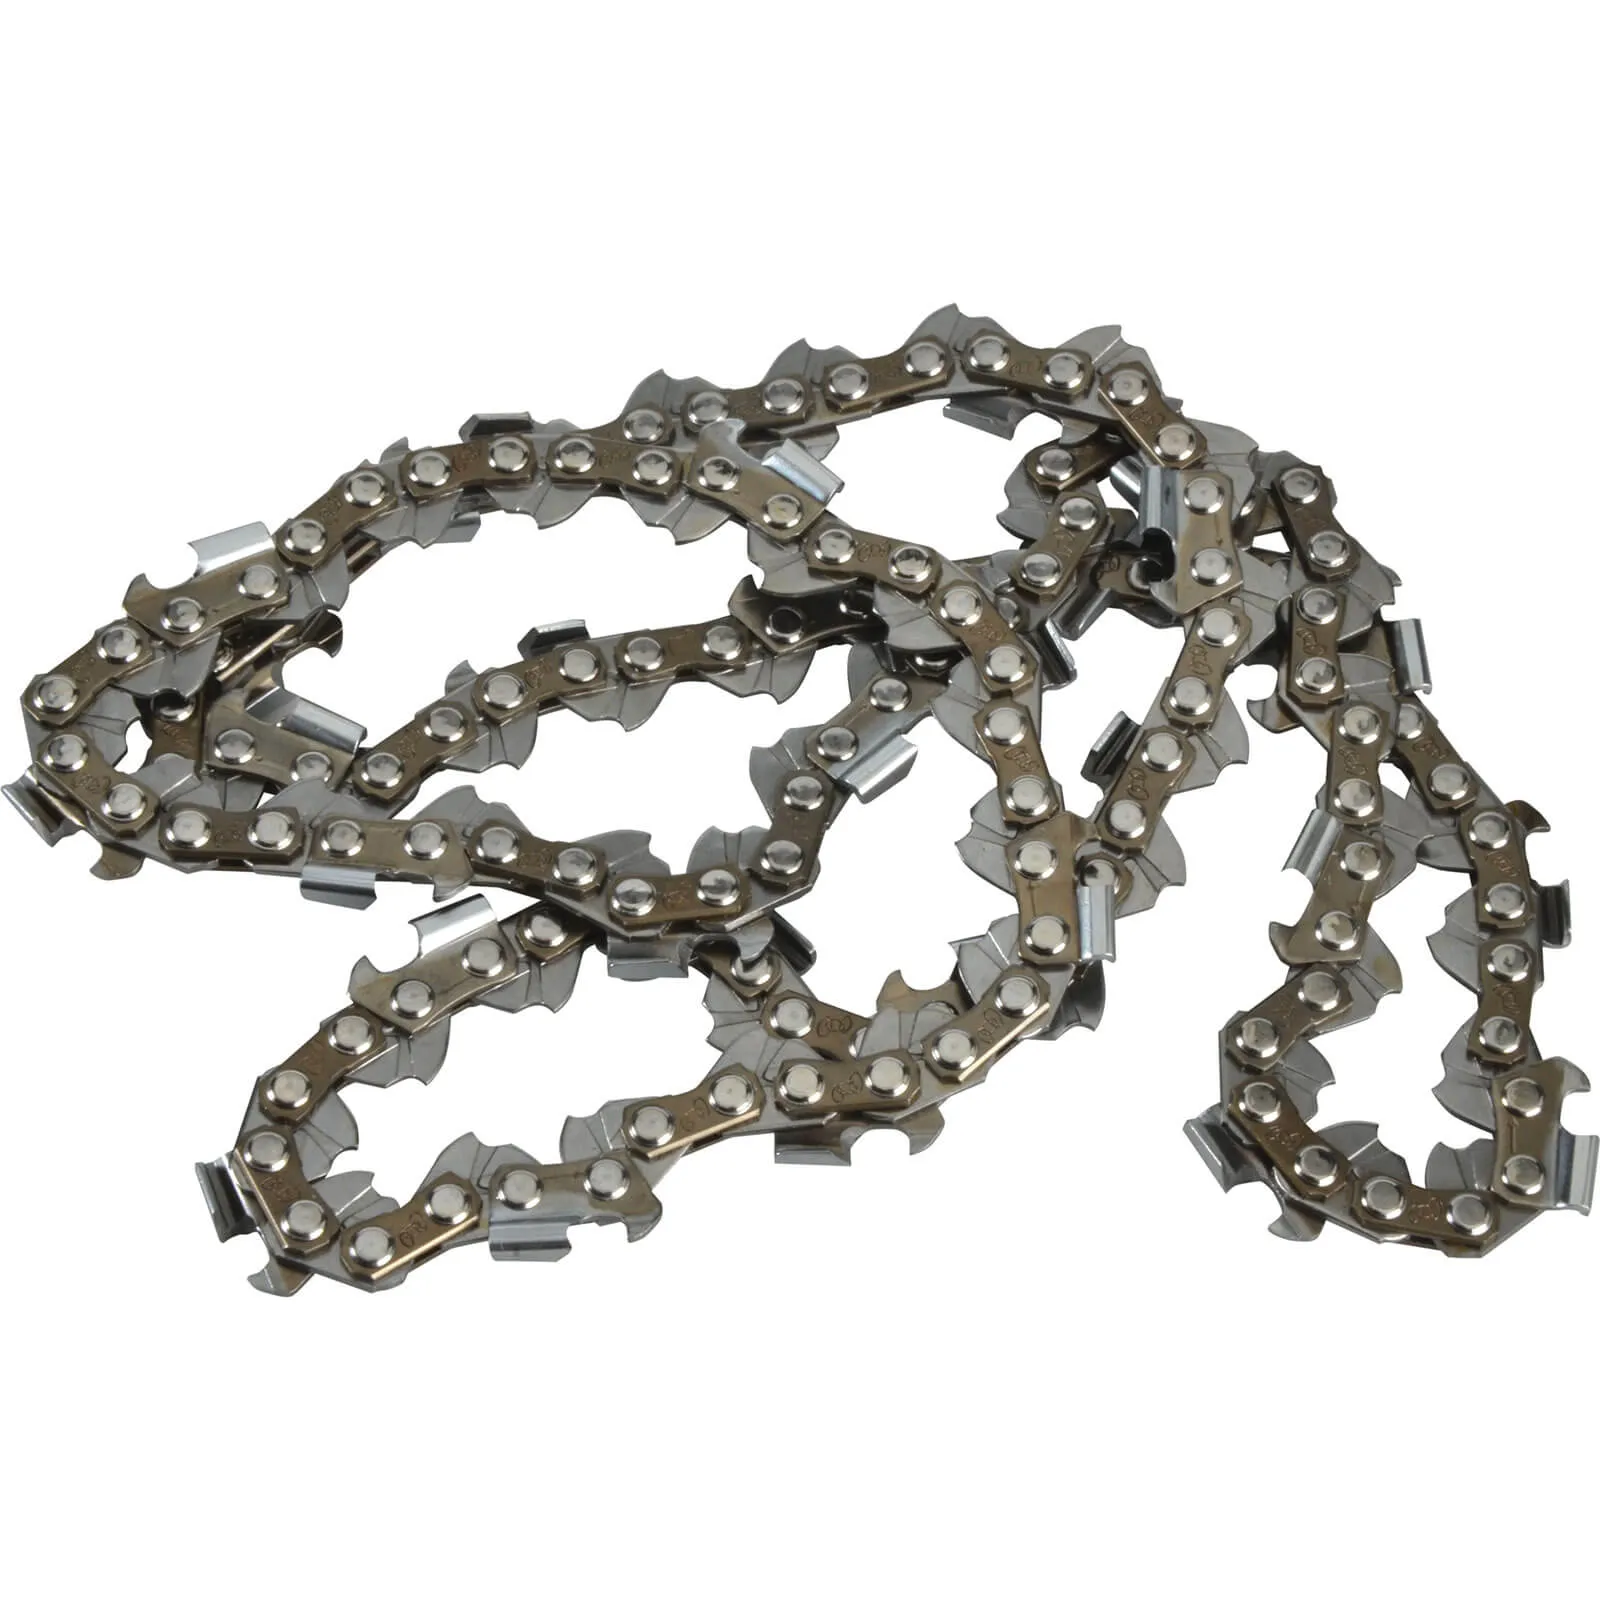 ALM CH066 Replacement Chainsaw Chain Fits Saws with a 40cm Bar and 66 Drive Links - 400mm